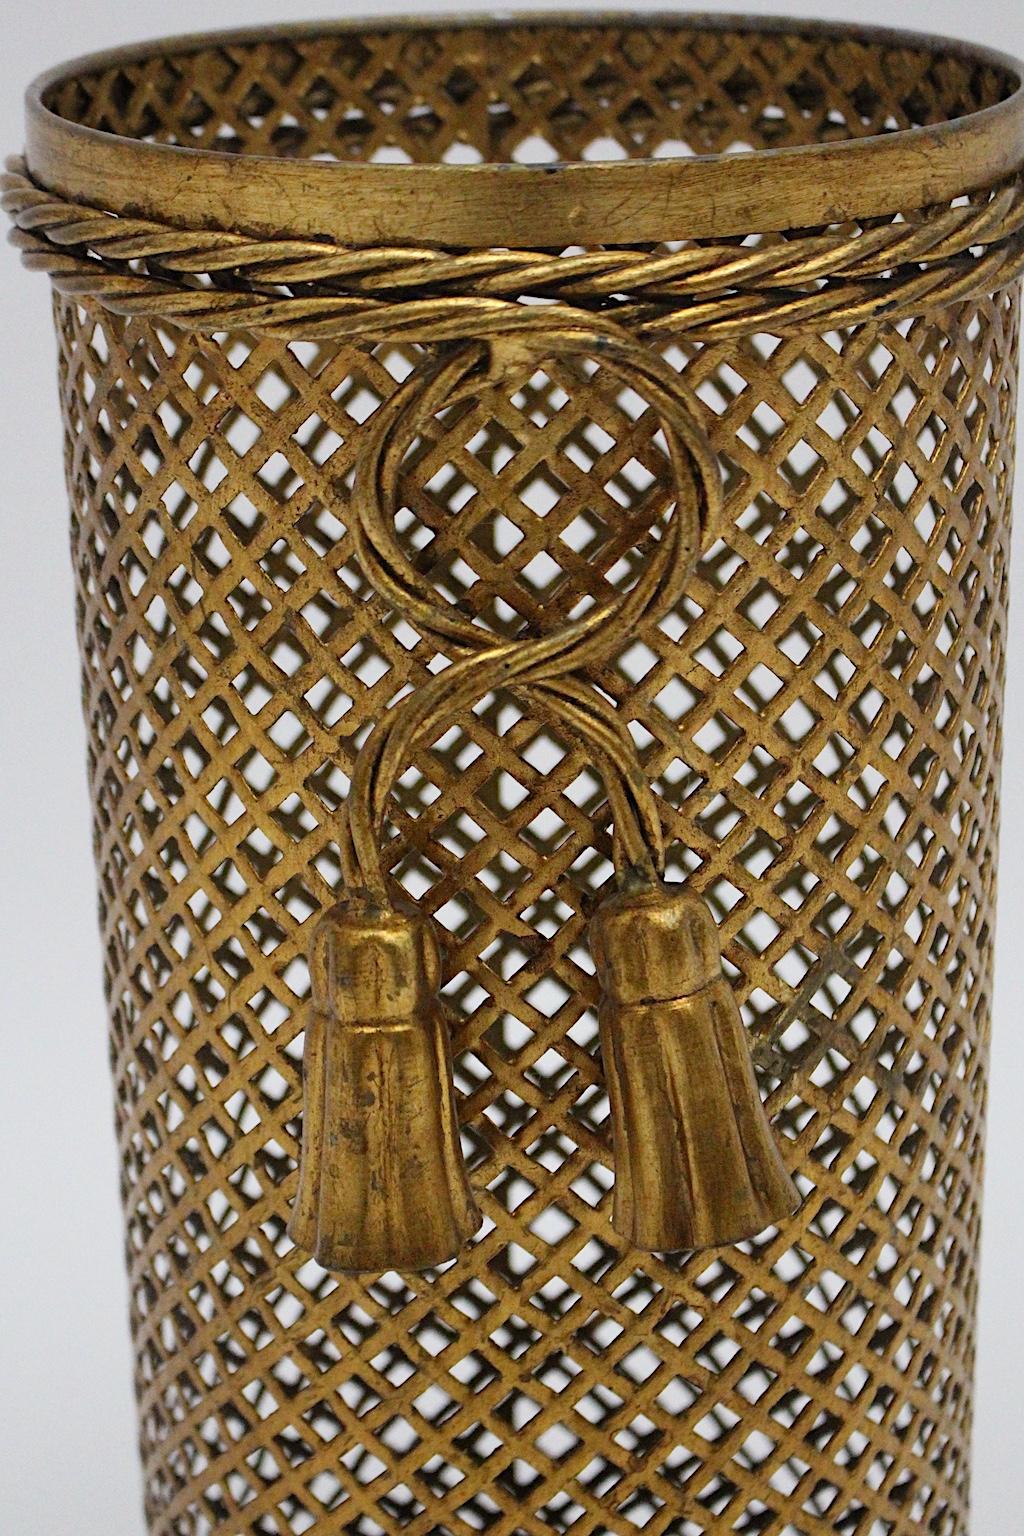 Hollywood Regency Style Gilded Umbrella Stand by Li Puma Firenze, 1950s, Italy For Sale 2